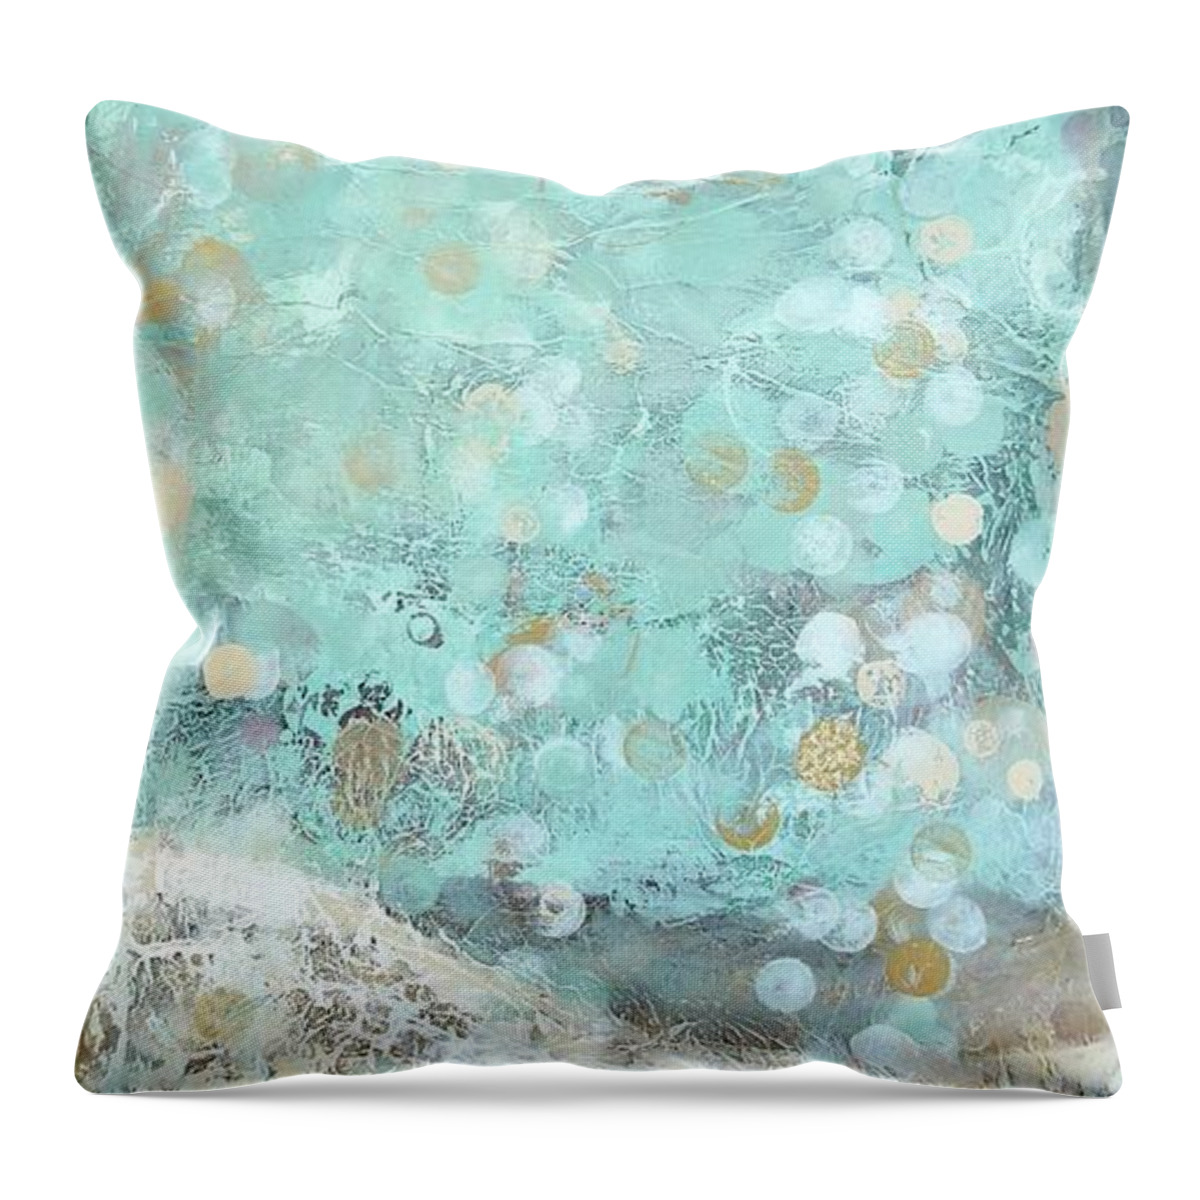 Abstract Art Throw Pillow featuring the painting Bahamian Rapture II by Kristen Abrahamson